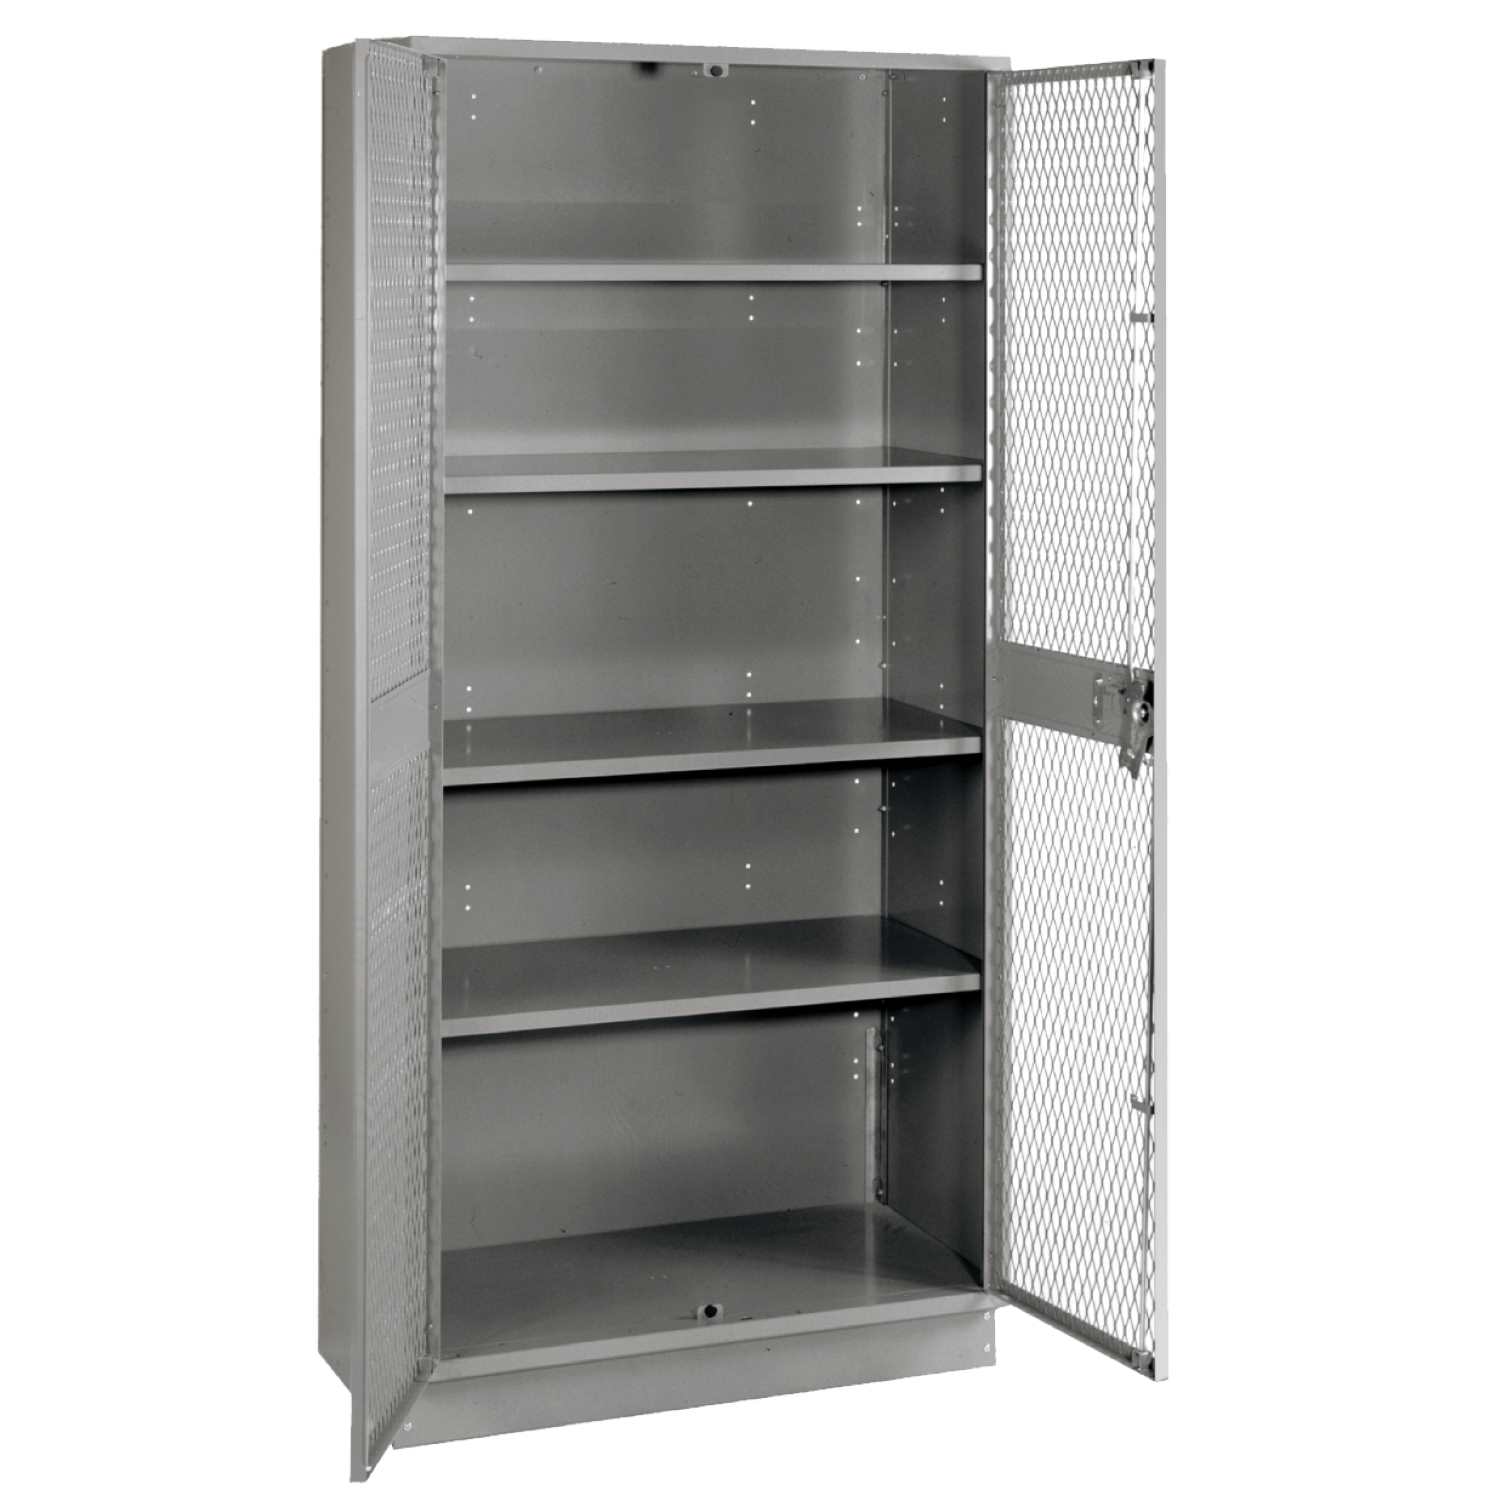 1150b All Welded Steel Visible Storage Cabinet With Base From Lyon